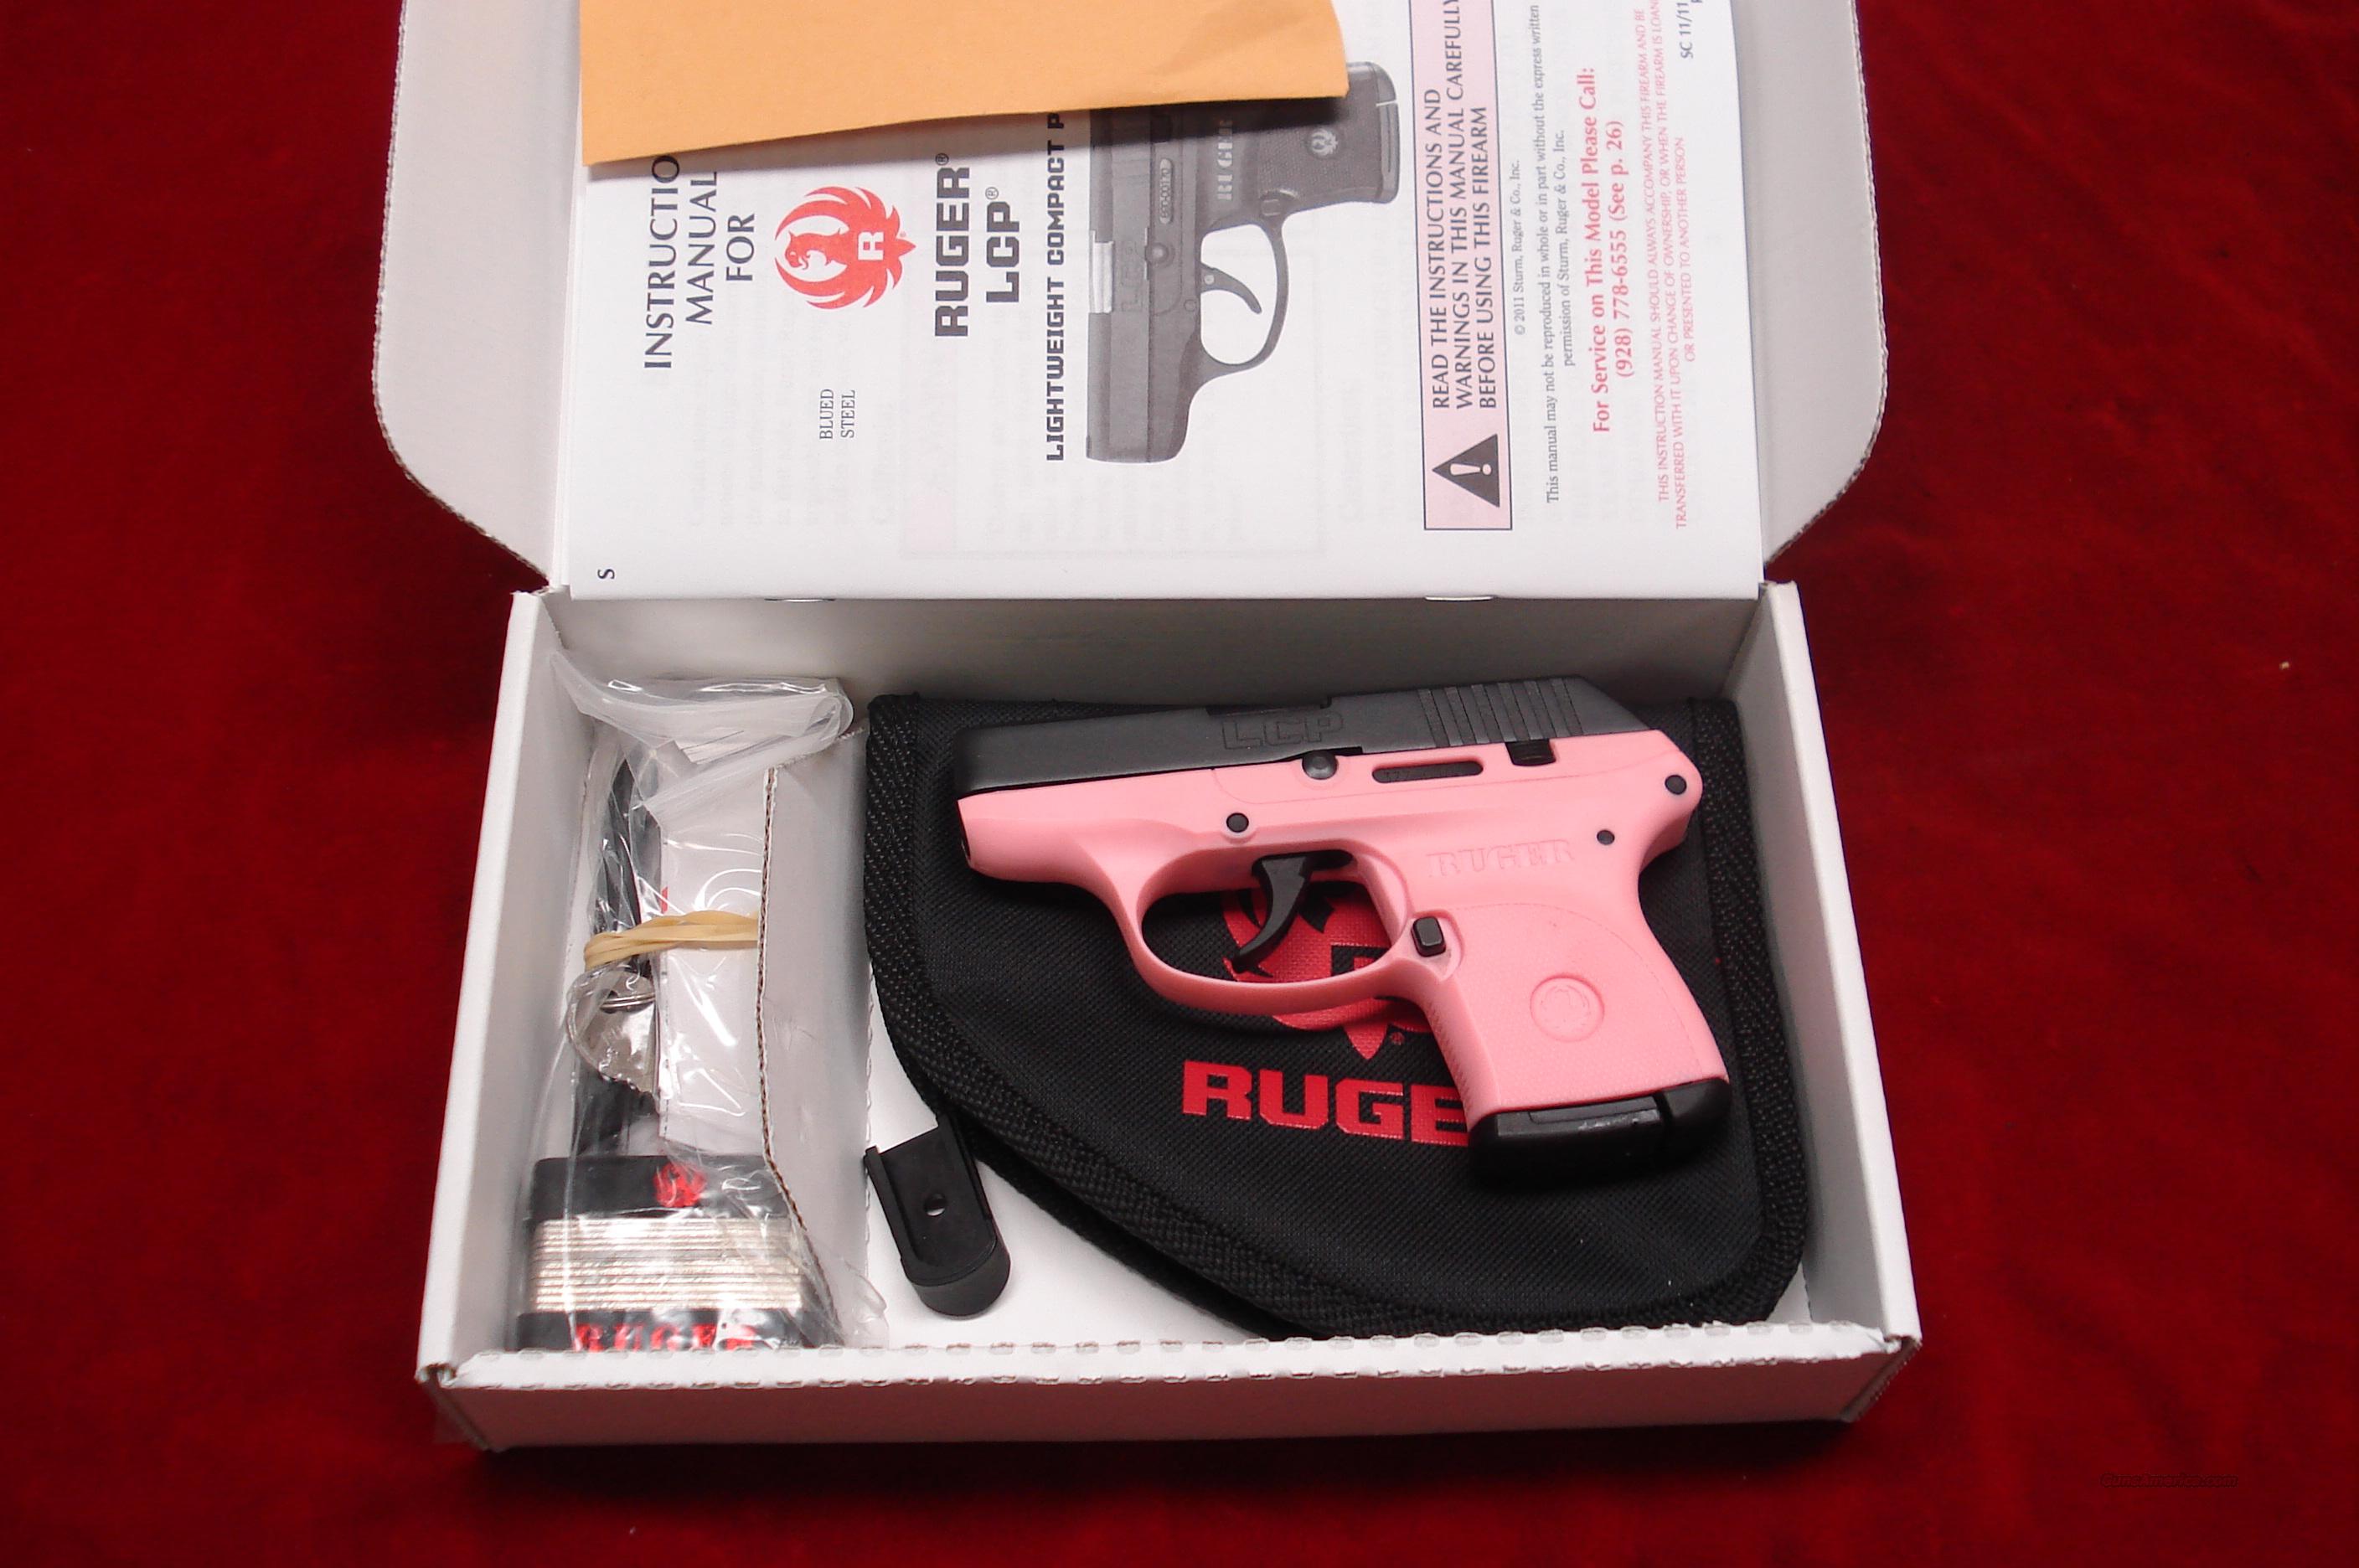 ruger-pink-lcp-lightweight-compact-pistol-380-for-sale